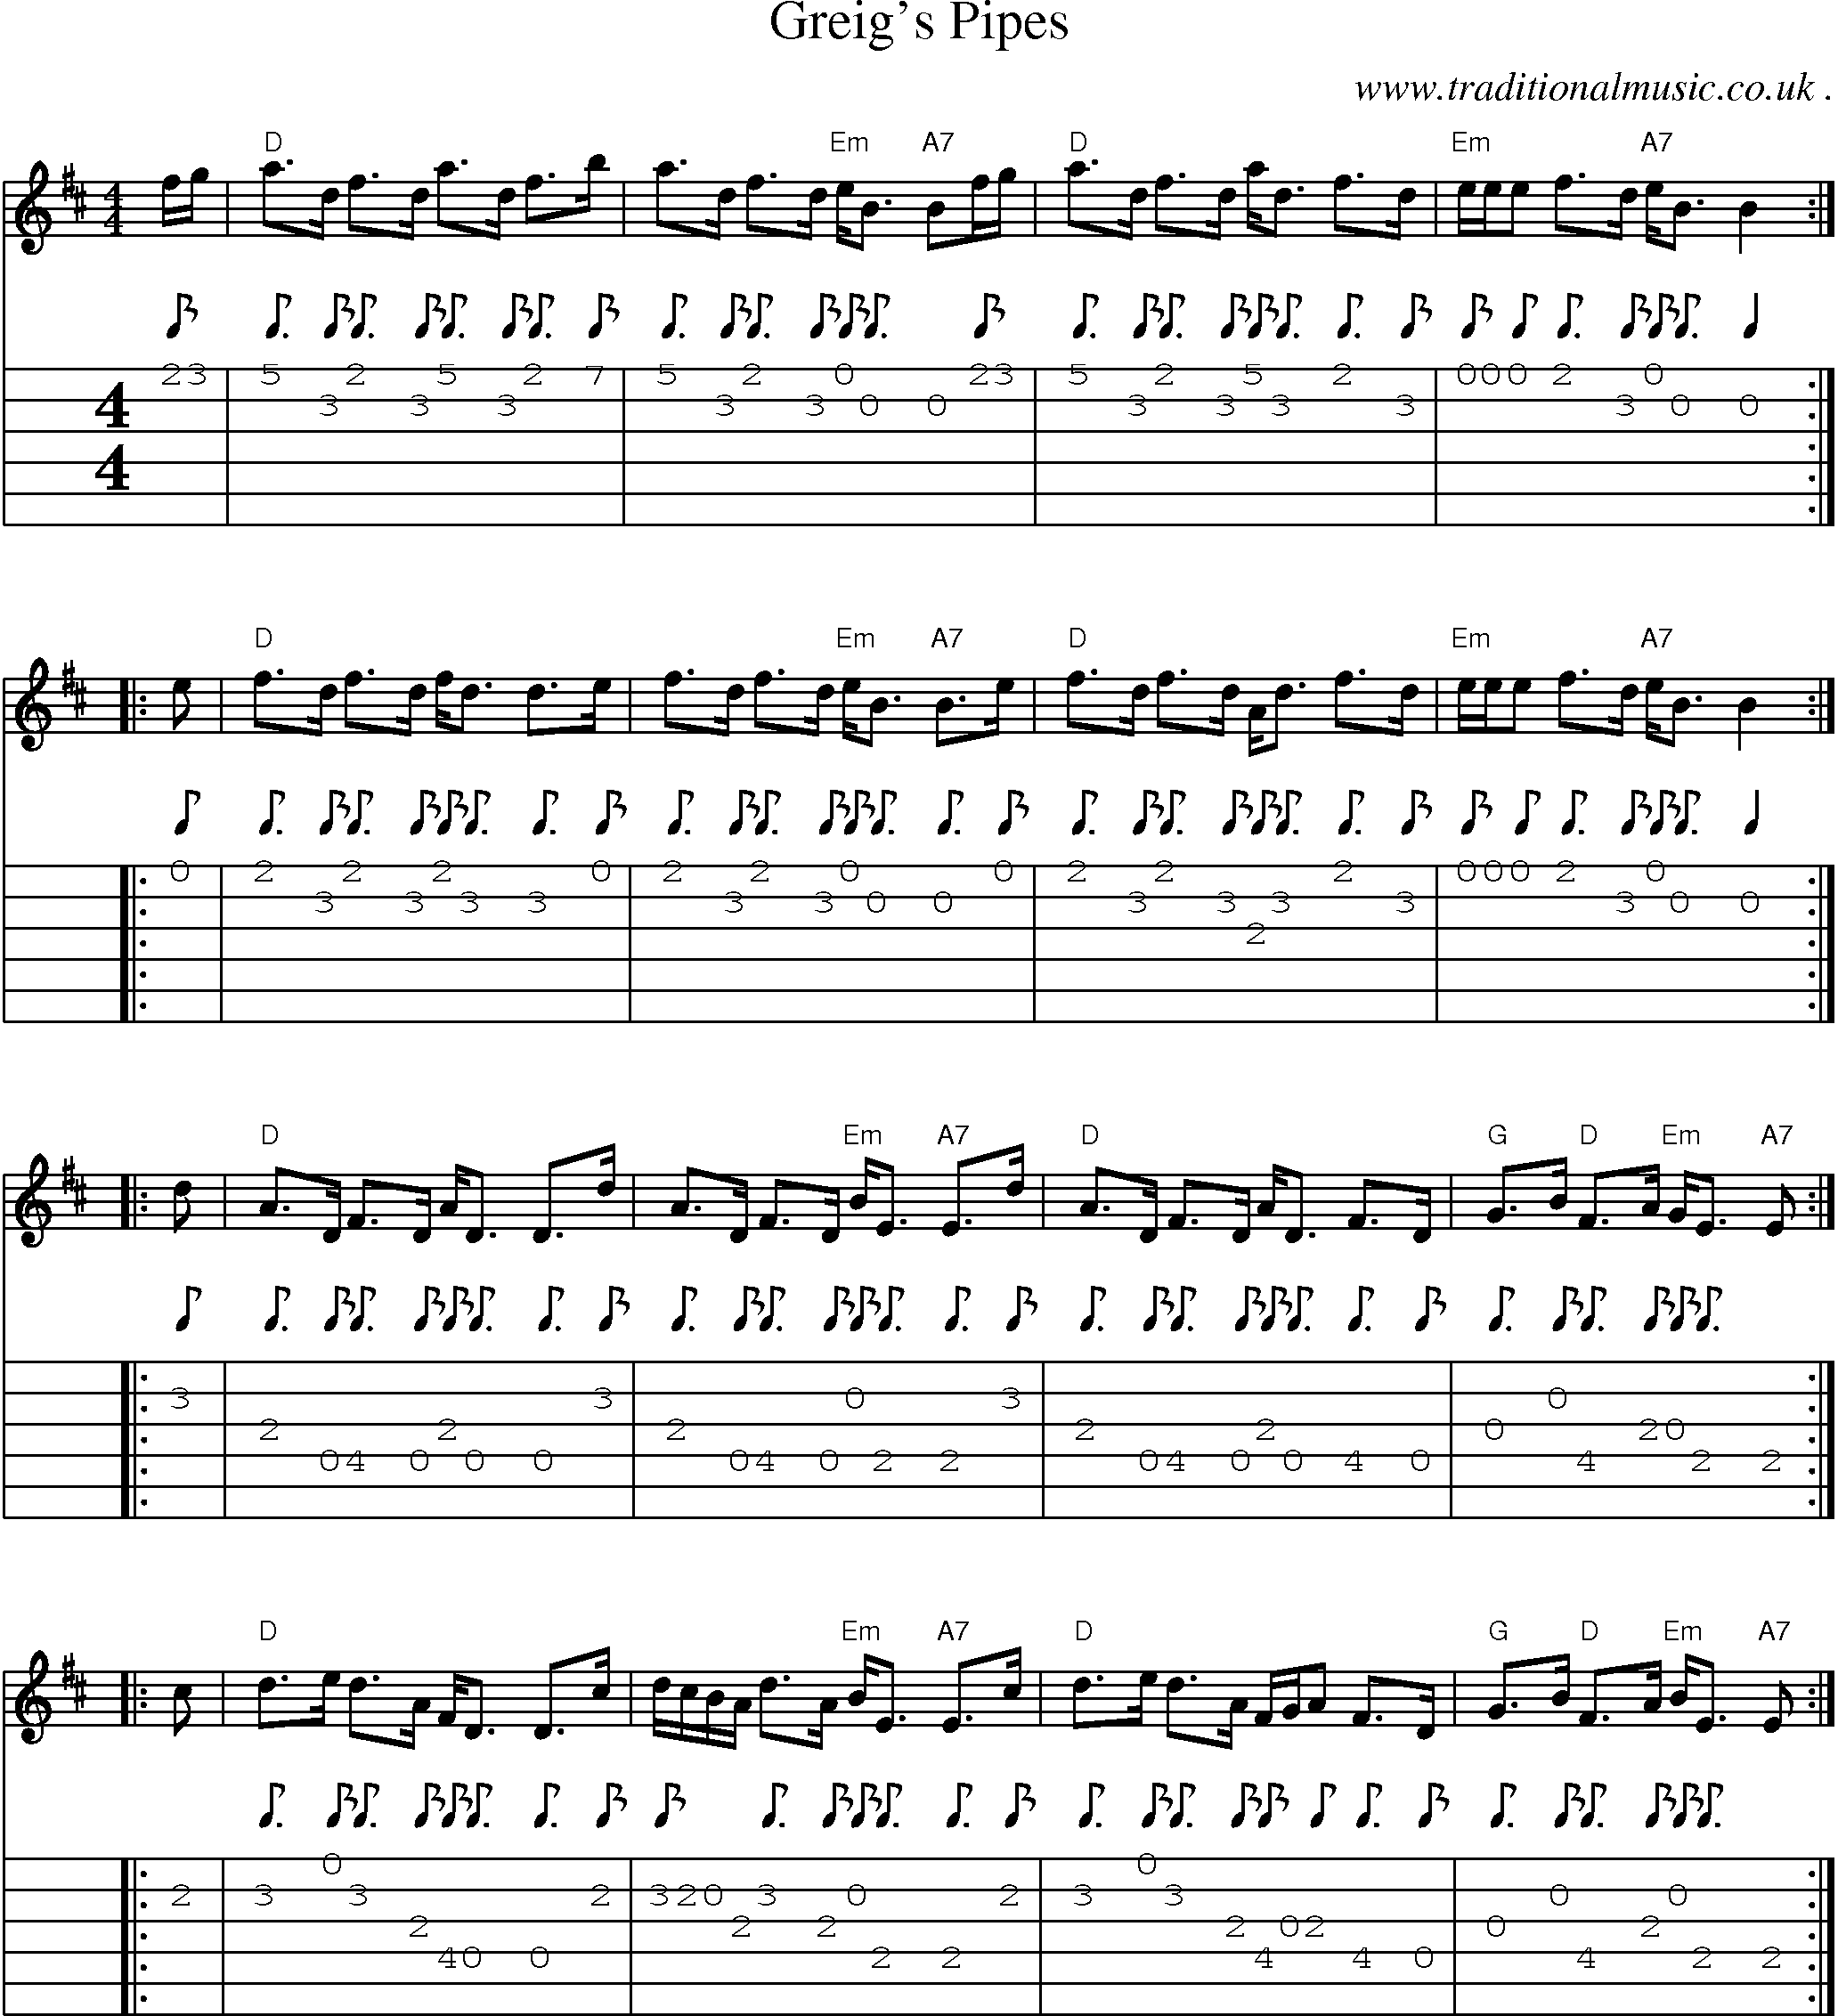 Sheet-music  score, Chords and Guitar Tabs for Greigs Pipes